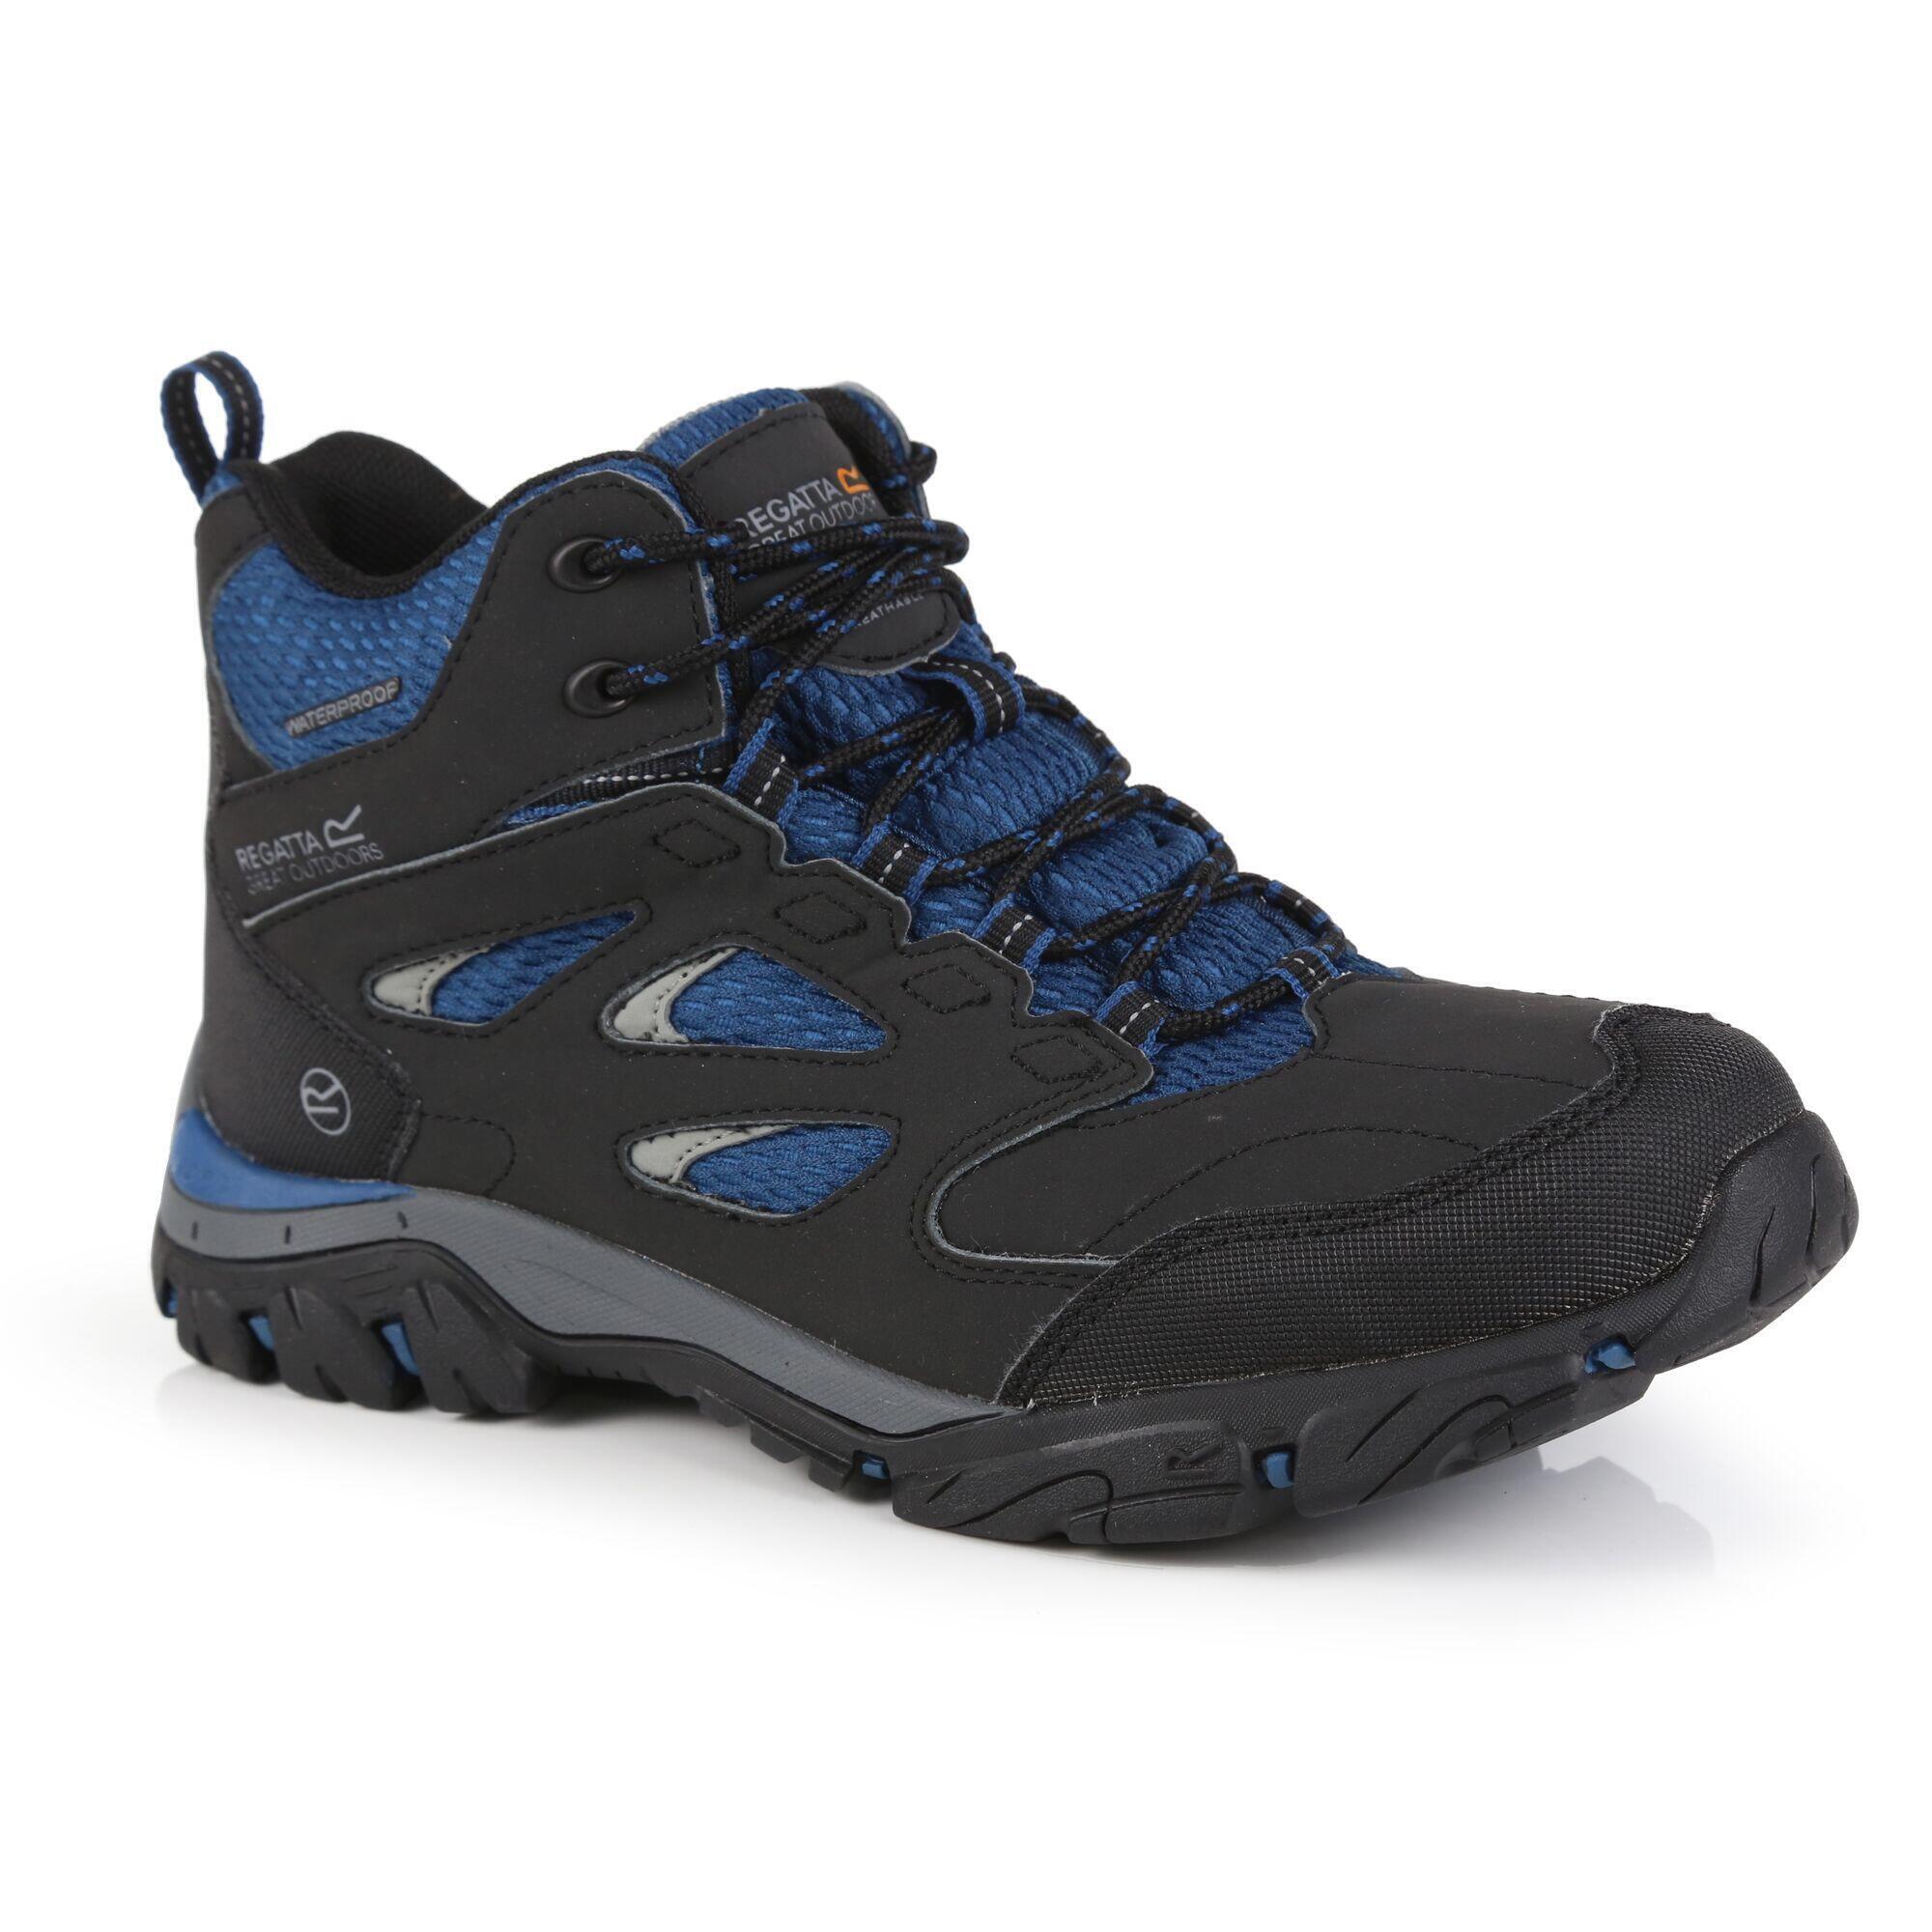 Lady Holcombe IEP Mid Women's Hiking Boots - Ash Grey / Blue 2/5